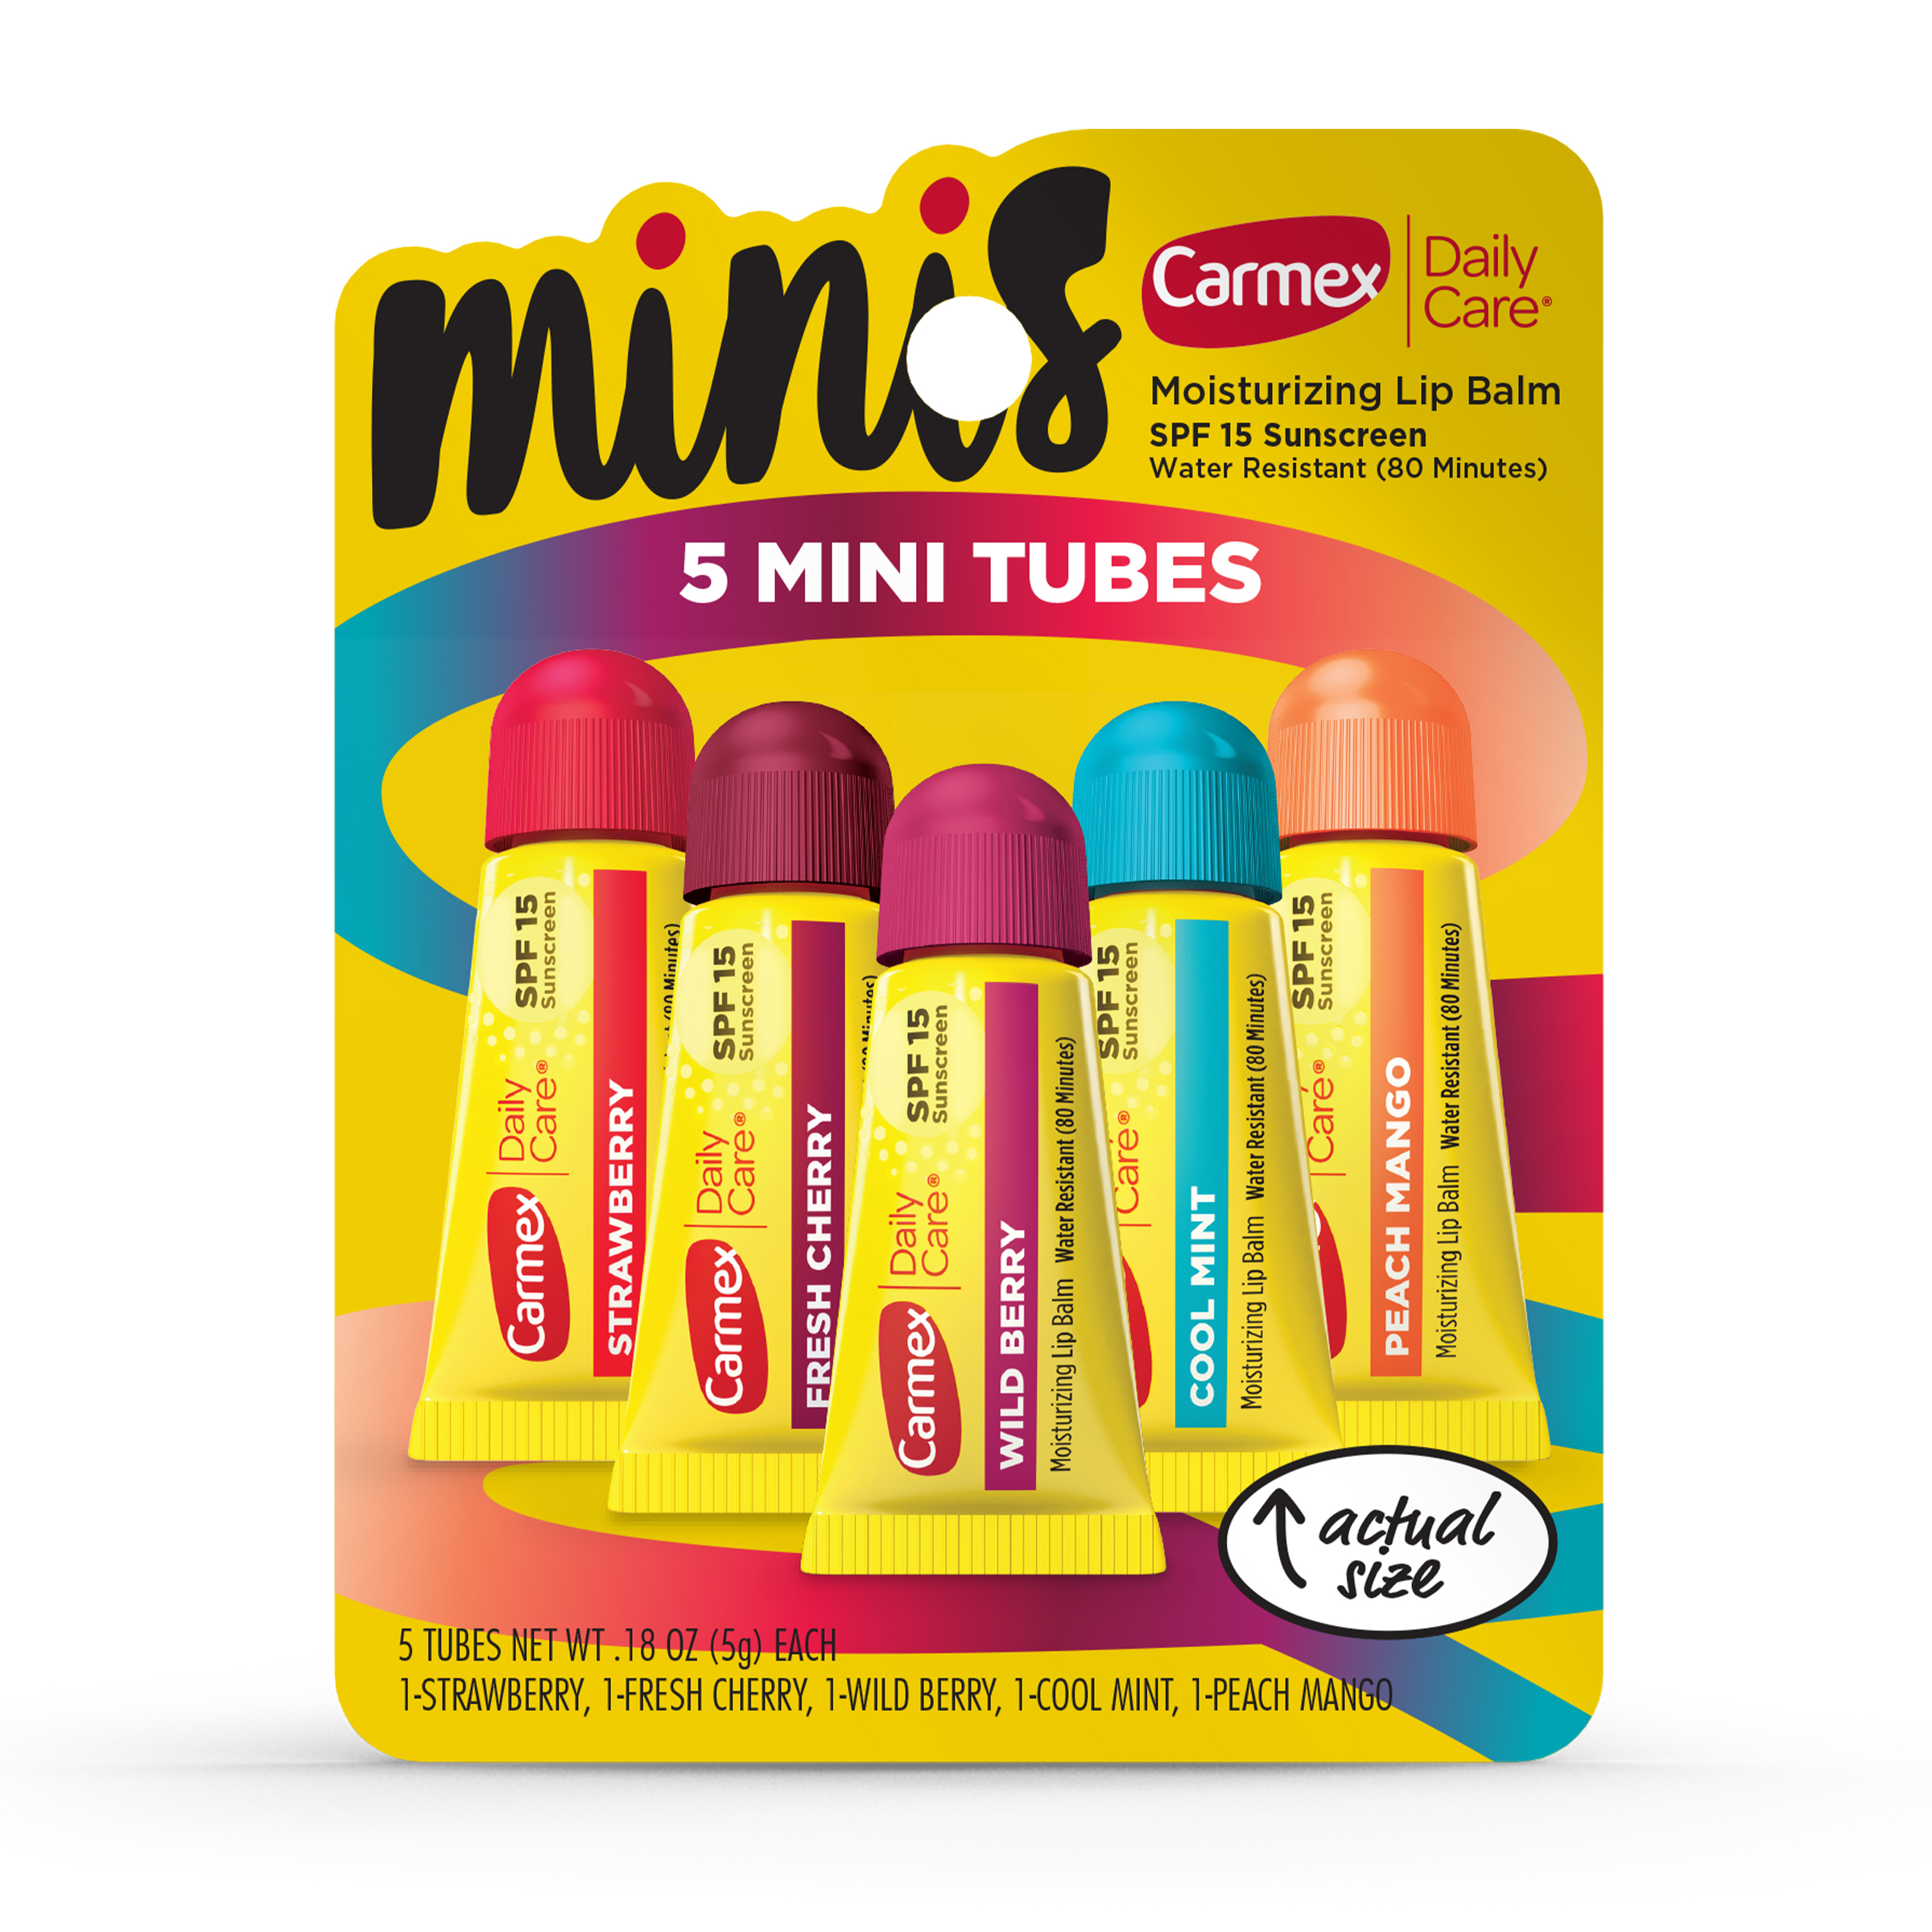 Carmex Daily Care Minis Lip Balm Tubes, SPF 15, Multi-Flavor Lip Balm Pack, 5 Count (1 Pack of 5) - image 11 of 11